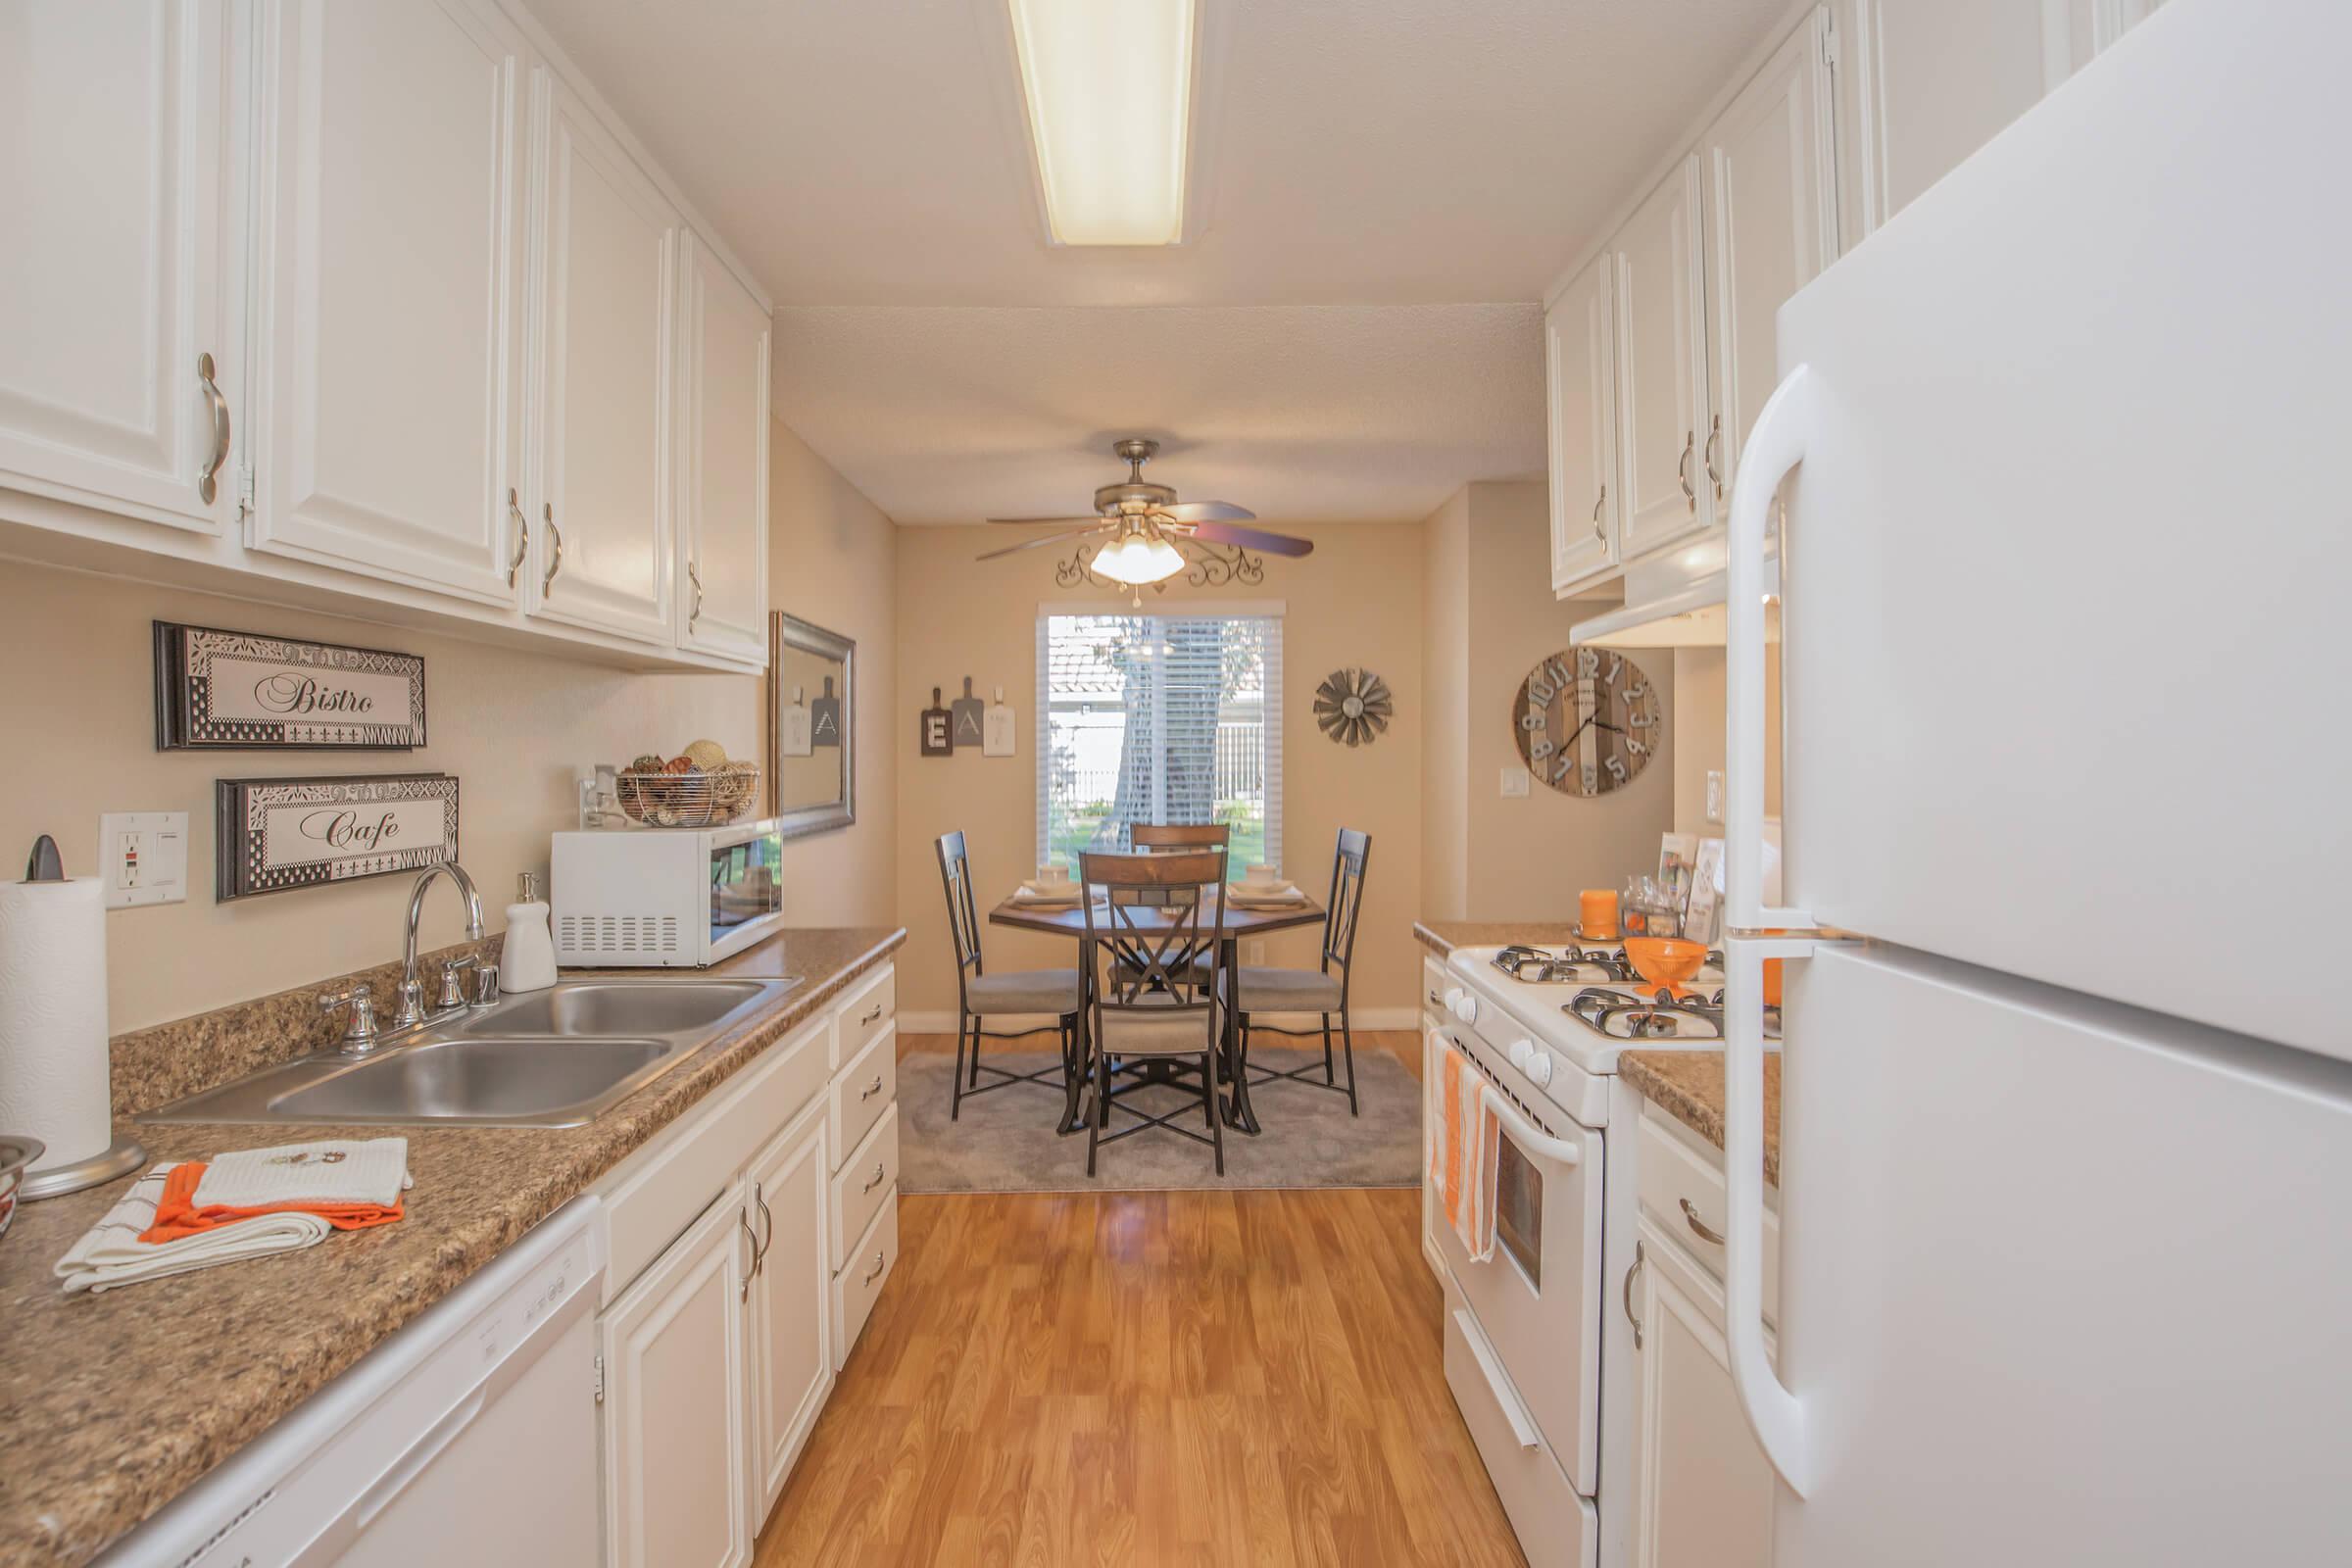 COMPLETE KITCHEN WITH DISHWASHER, PANTRY, AND GRANITE COUNTERTOPS